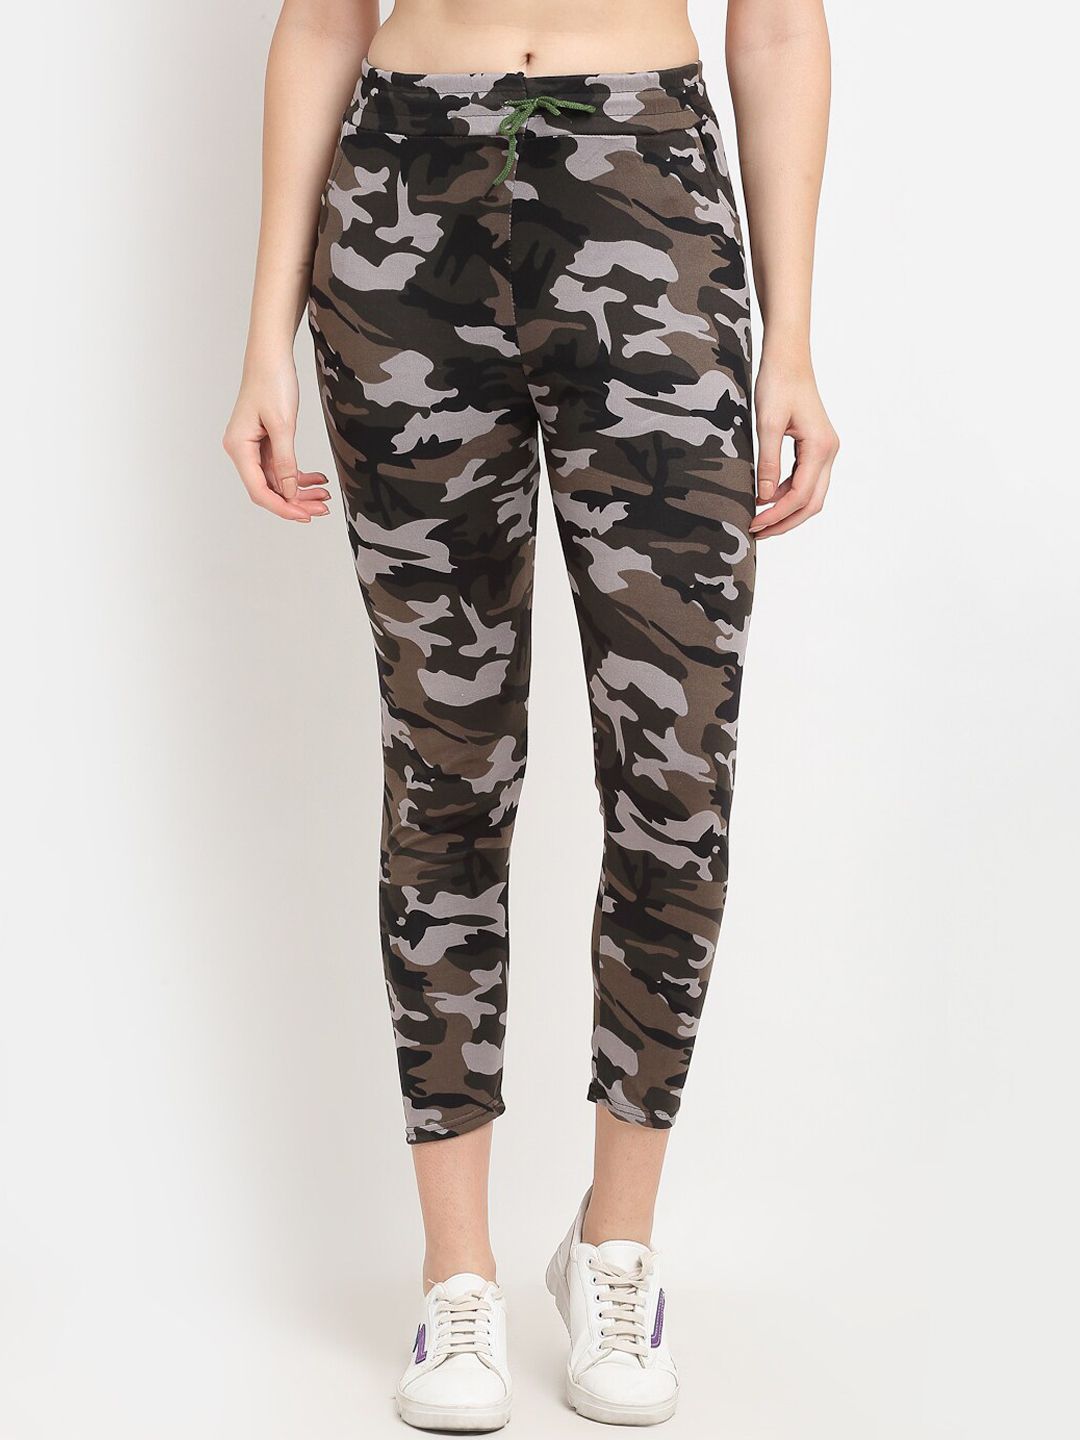 TAG 7 Women Grey & Beige Camouflage Printed Trousers Price in India